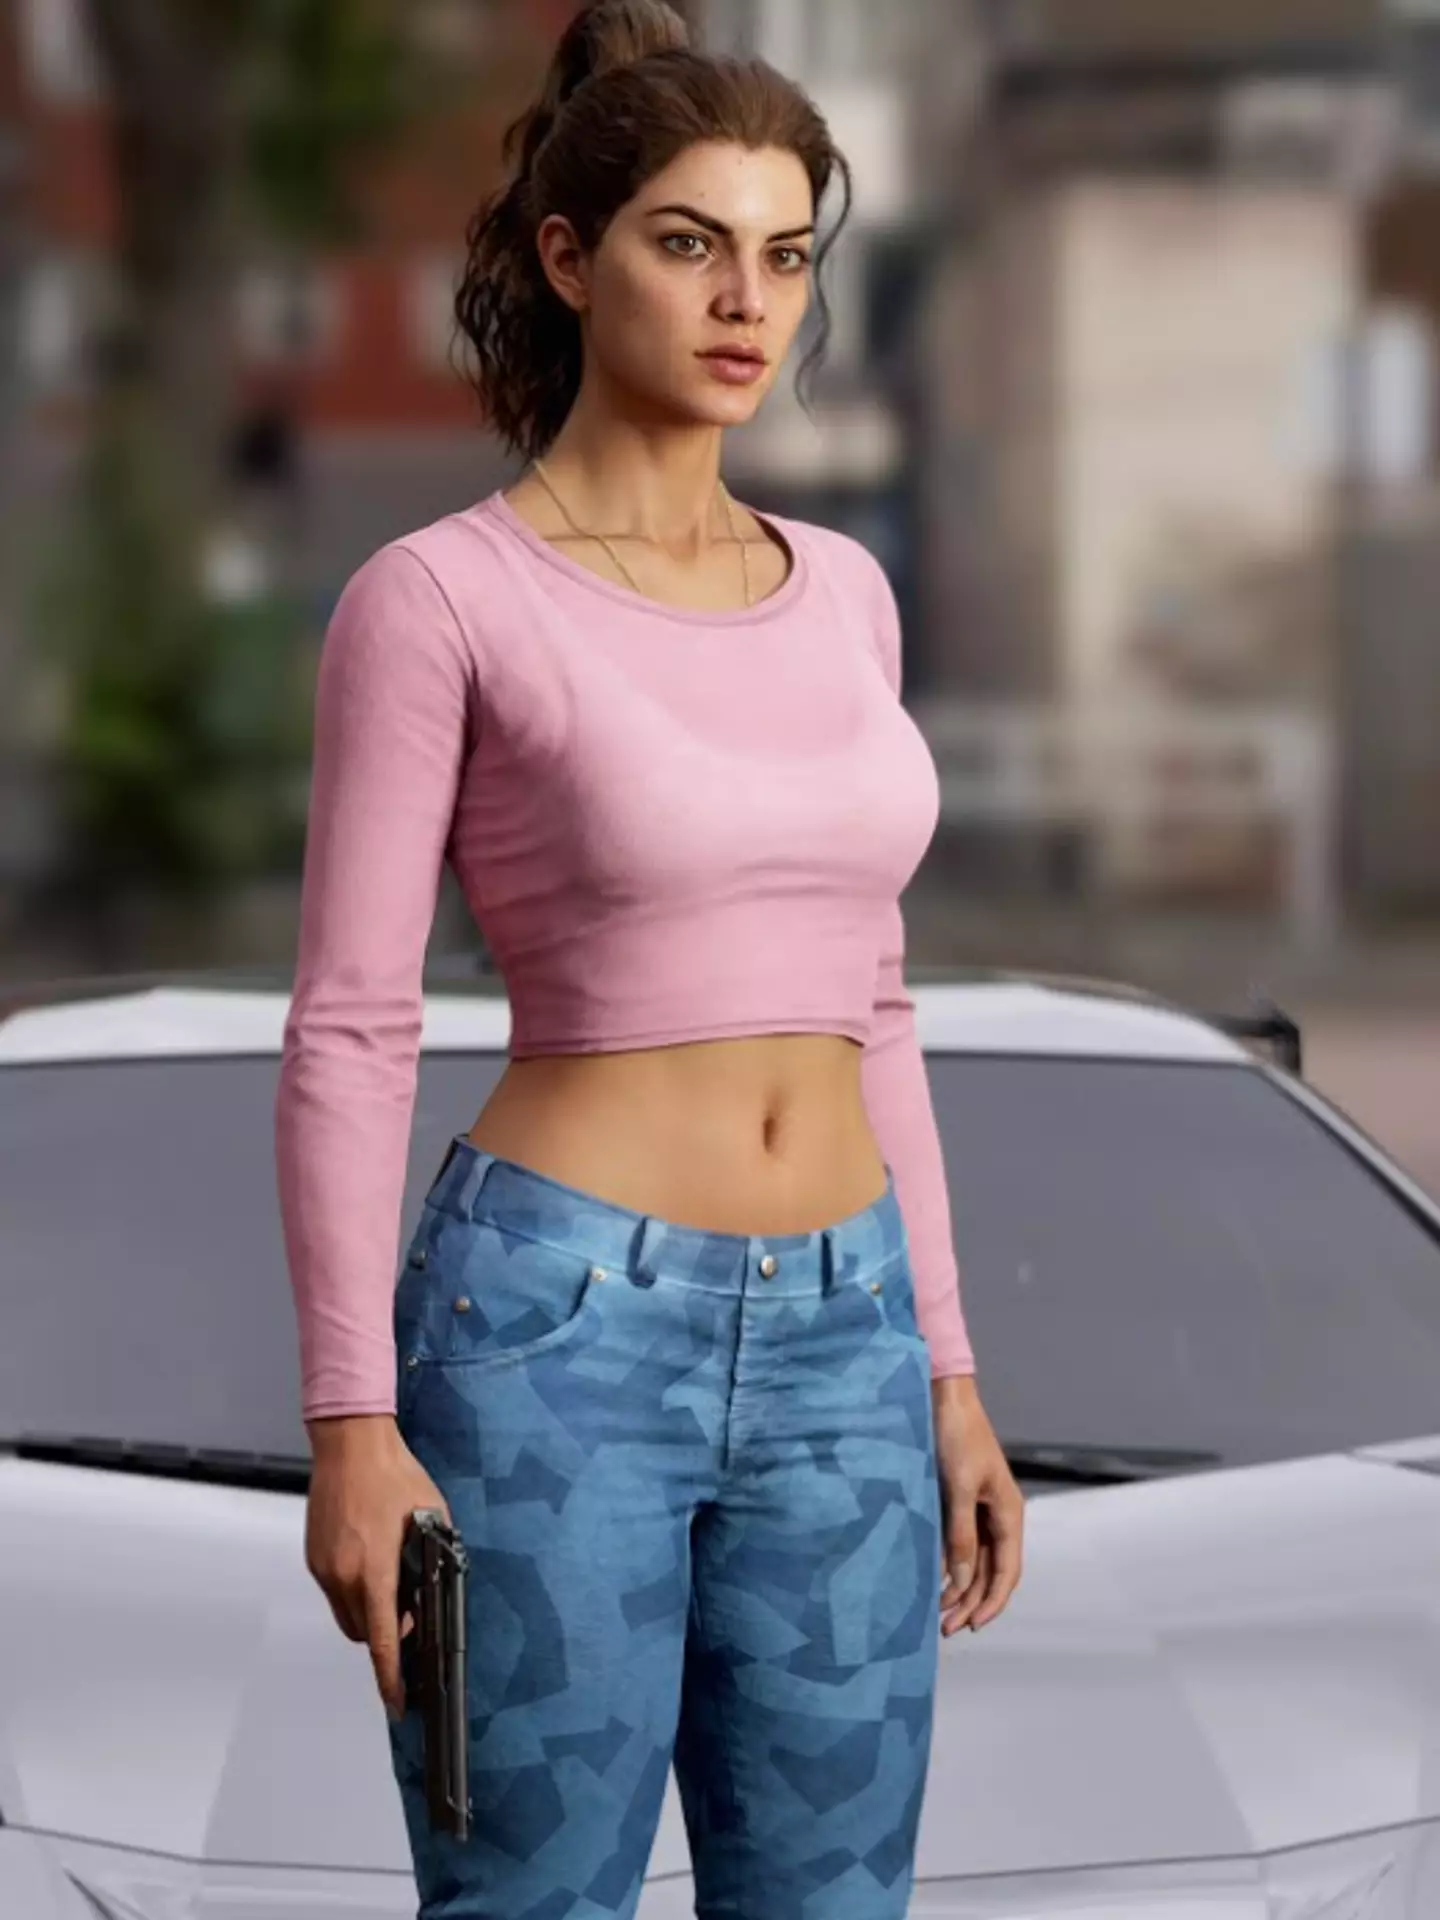 There's rumors GTA 6 will have a female protagonist.